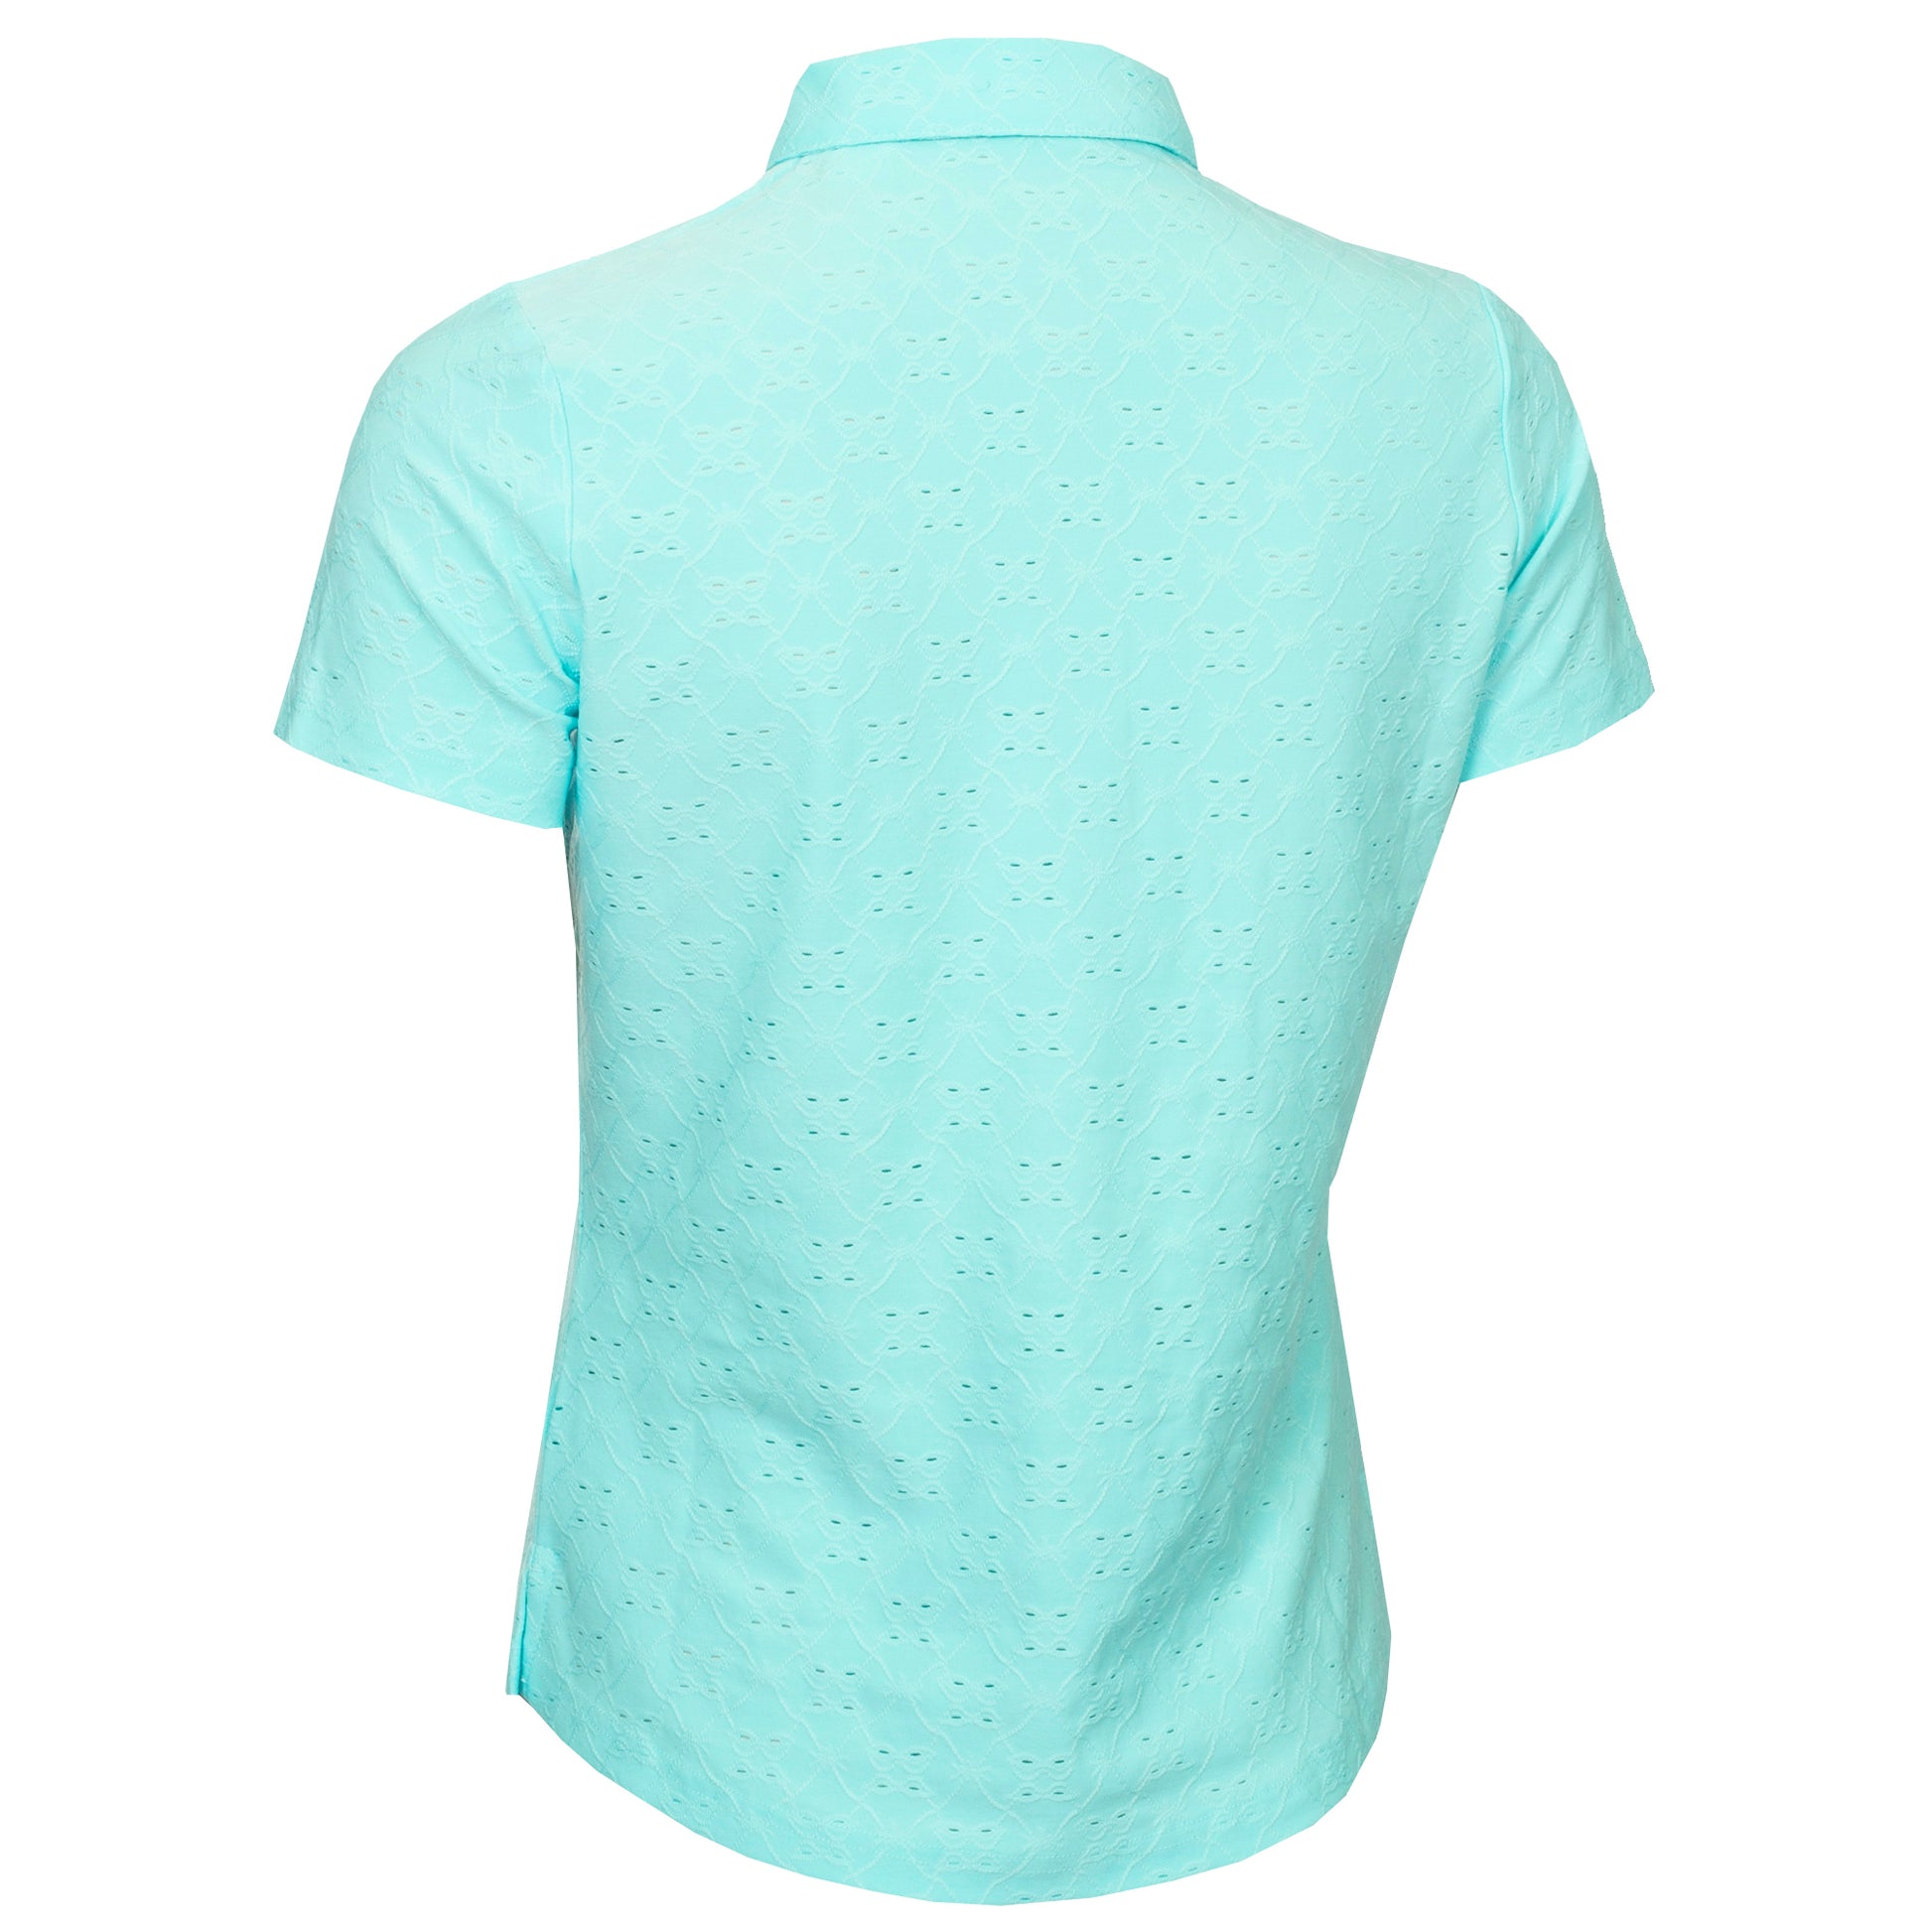 Green Lamb Women's Broderie Anglaise Pattern Polo in Aqua